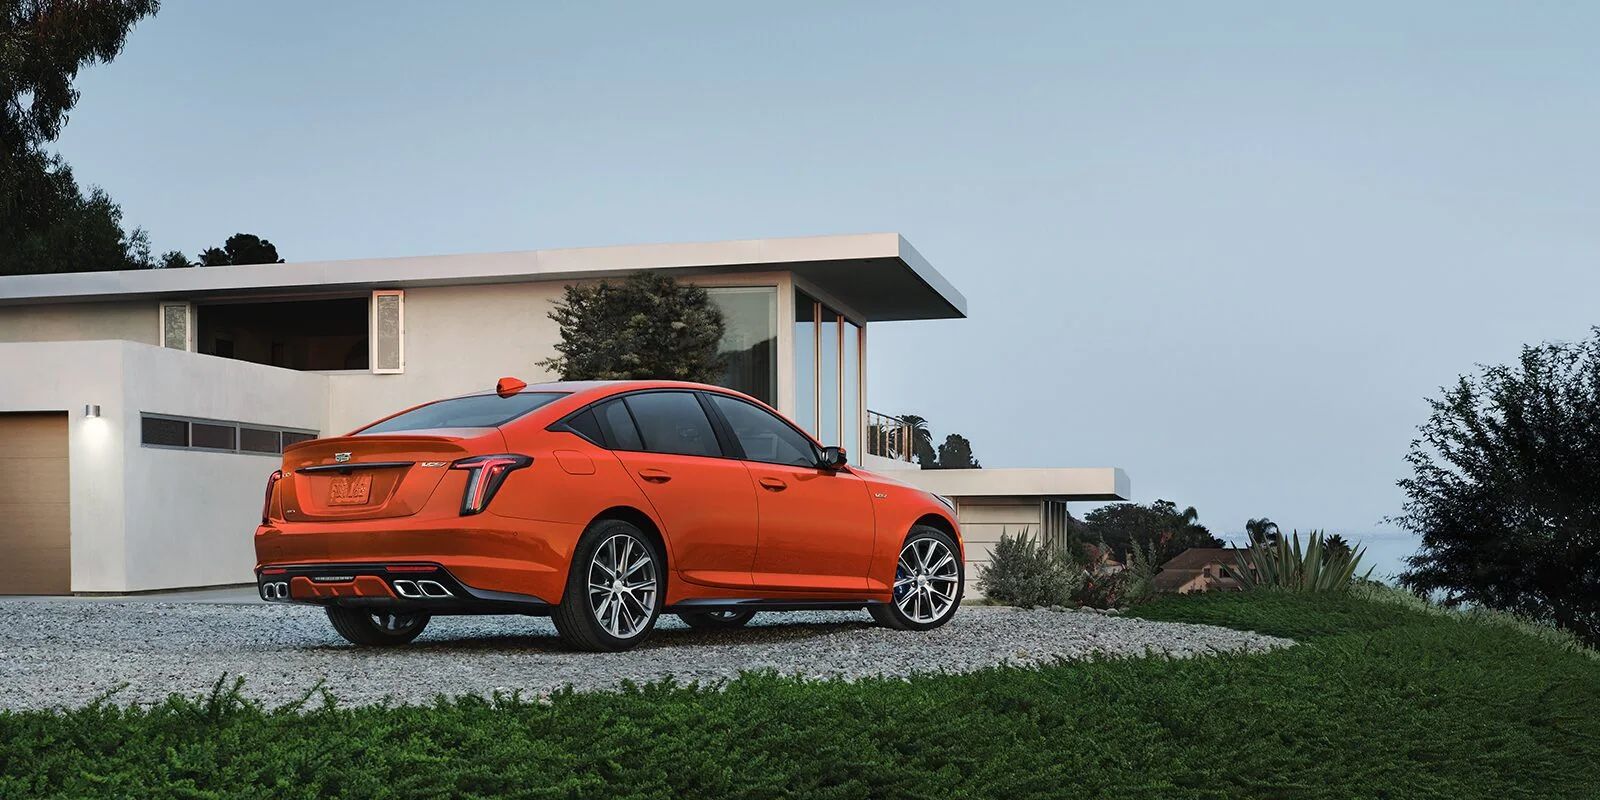 Rear 3/4 view of orange 2023 Cadillac CT5-V Blackwing parked outdoors.